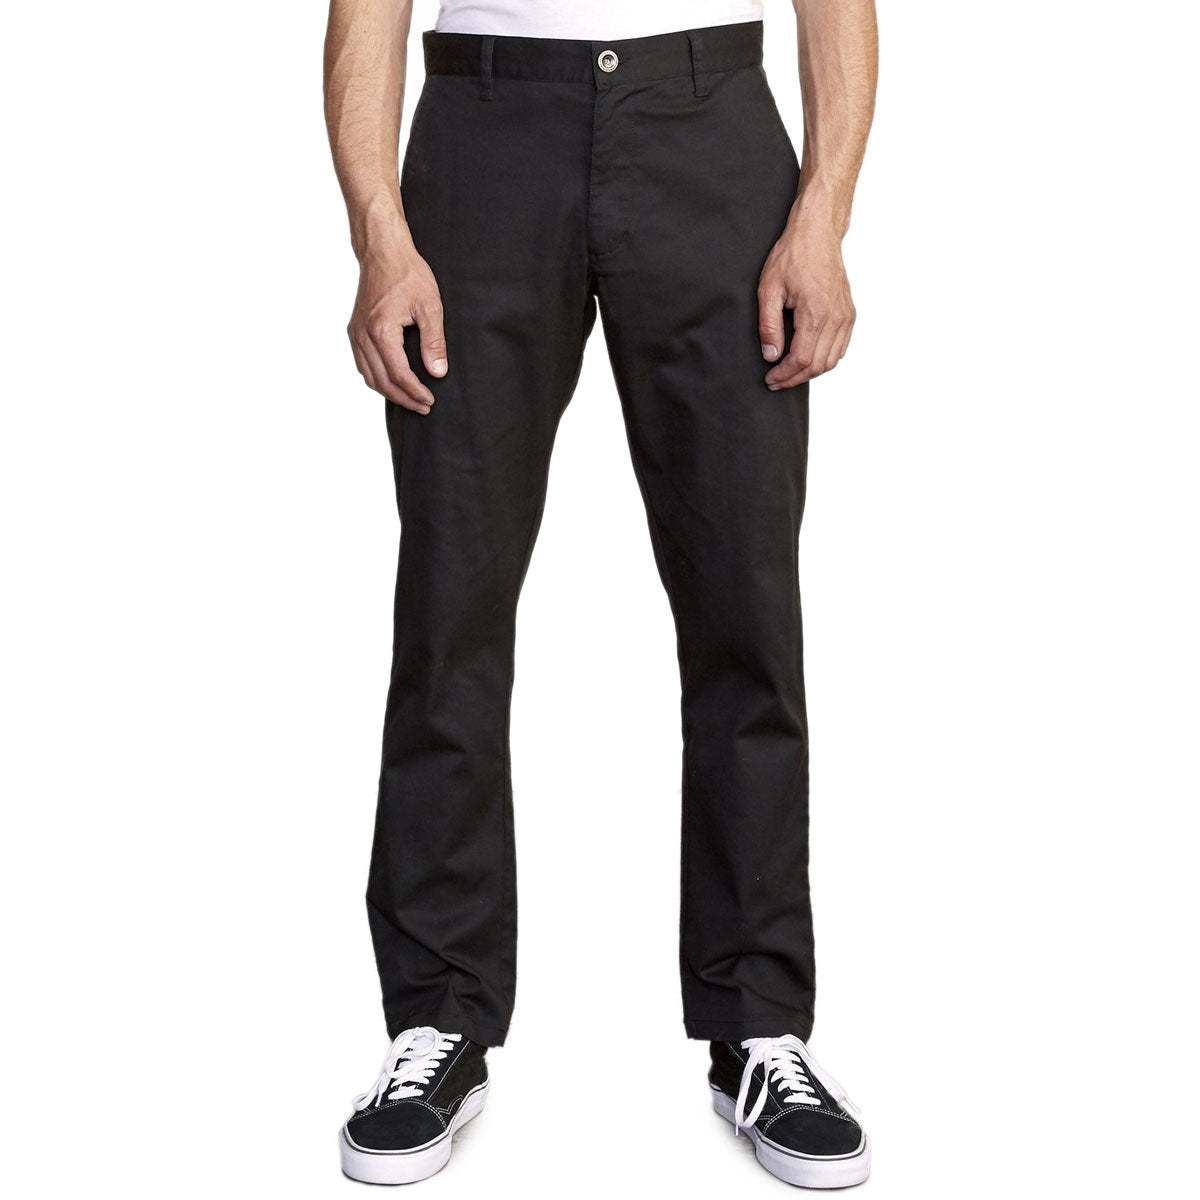 RVCA The Weekend Stretch Pants - Black image 1